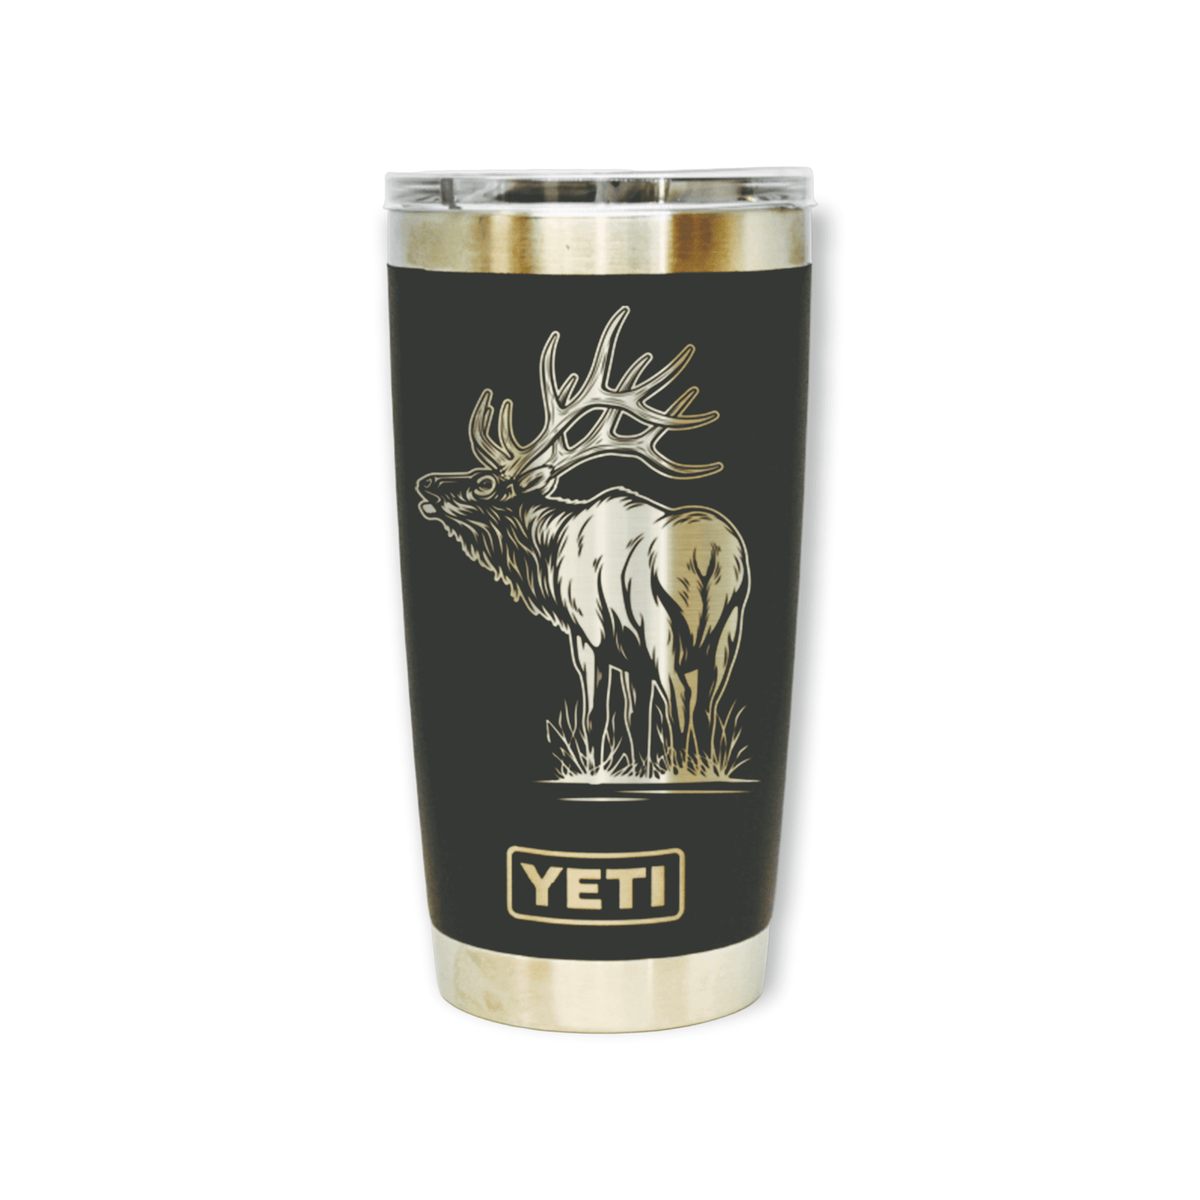 https://cdn.shopify.com/s/files/1/0606/5497/7184/products/wind-river_outpost_elk-yeti_1200x.png?v=1678141216